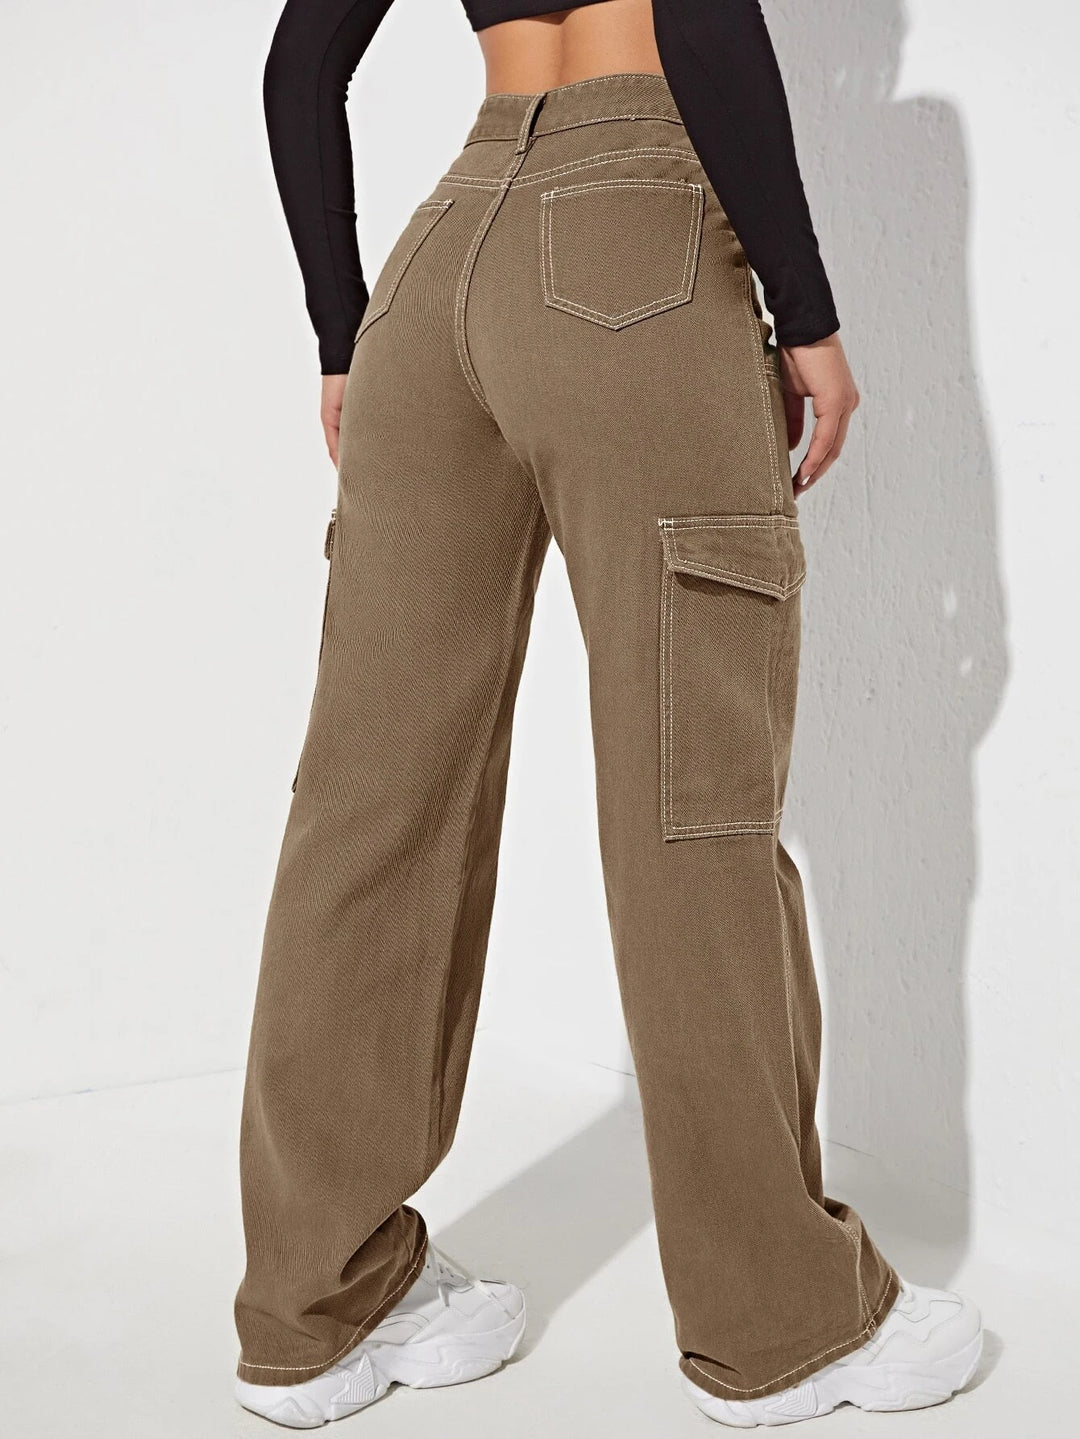 High Waist Side Pocketed Jeans